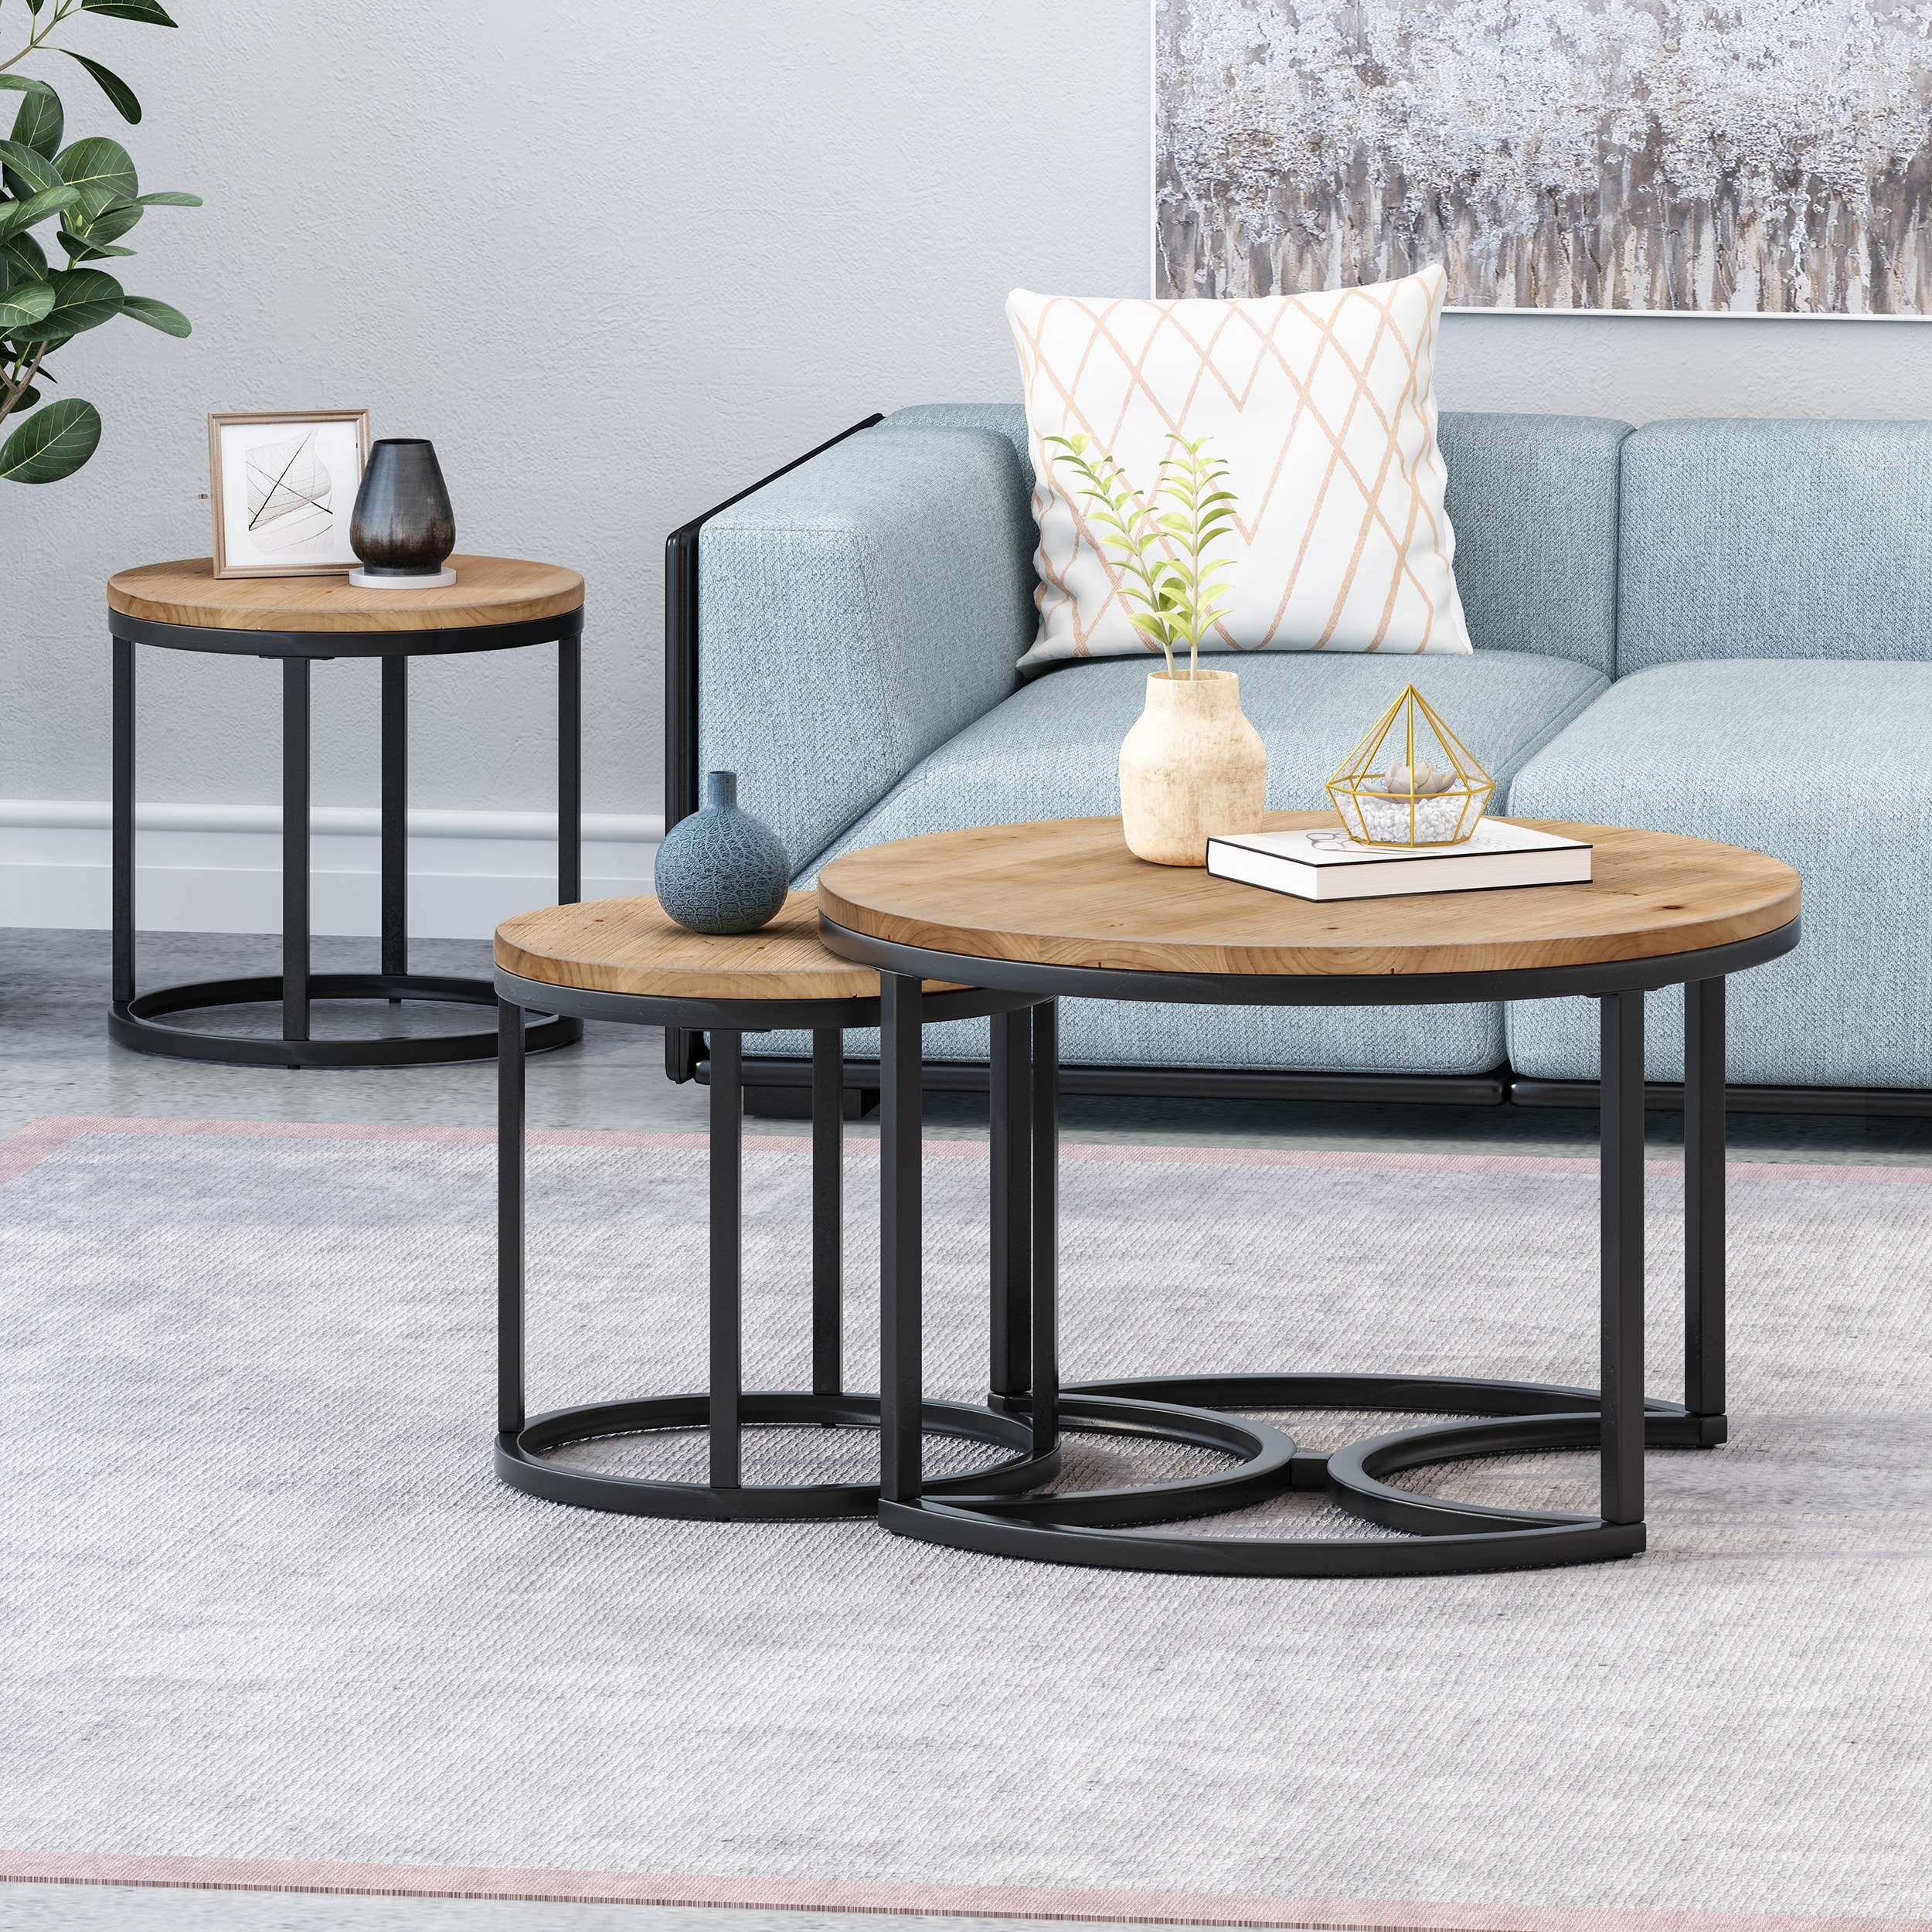 Gerrish Modern Industrial Coffee Table Set By Christopher Knight Home On Sale Overstock 30345520